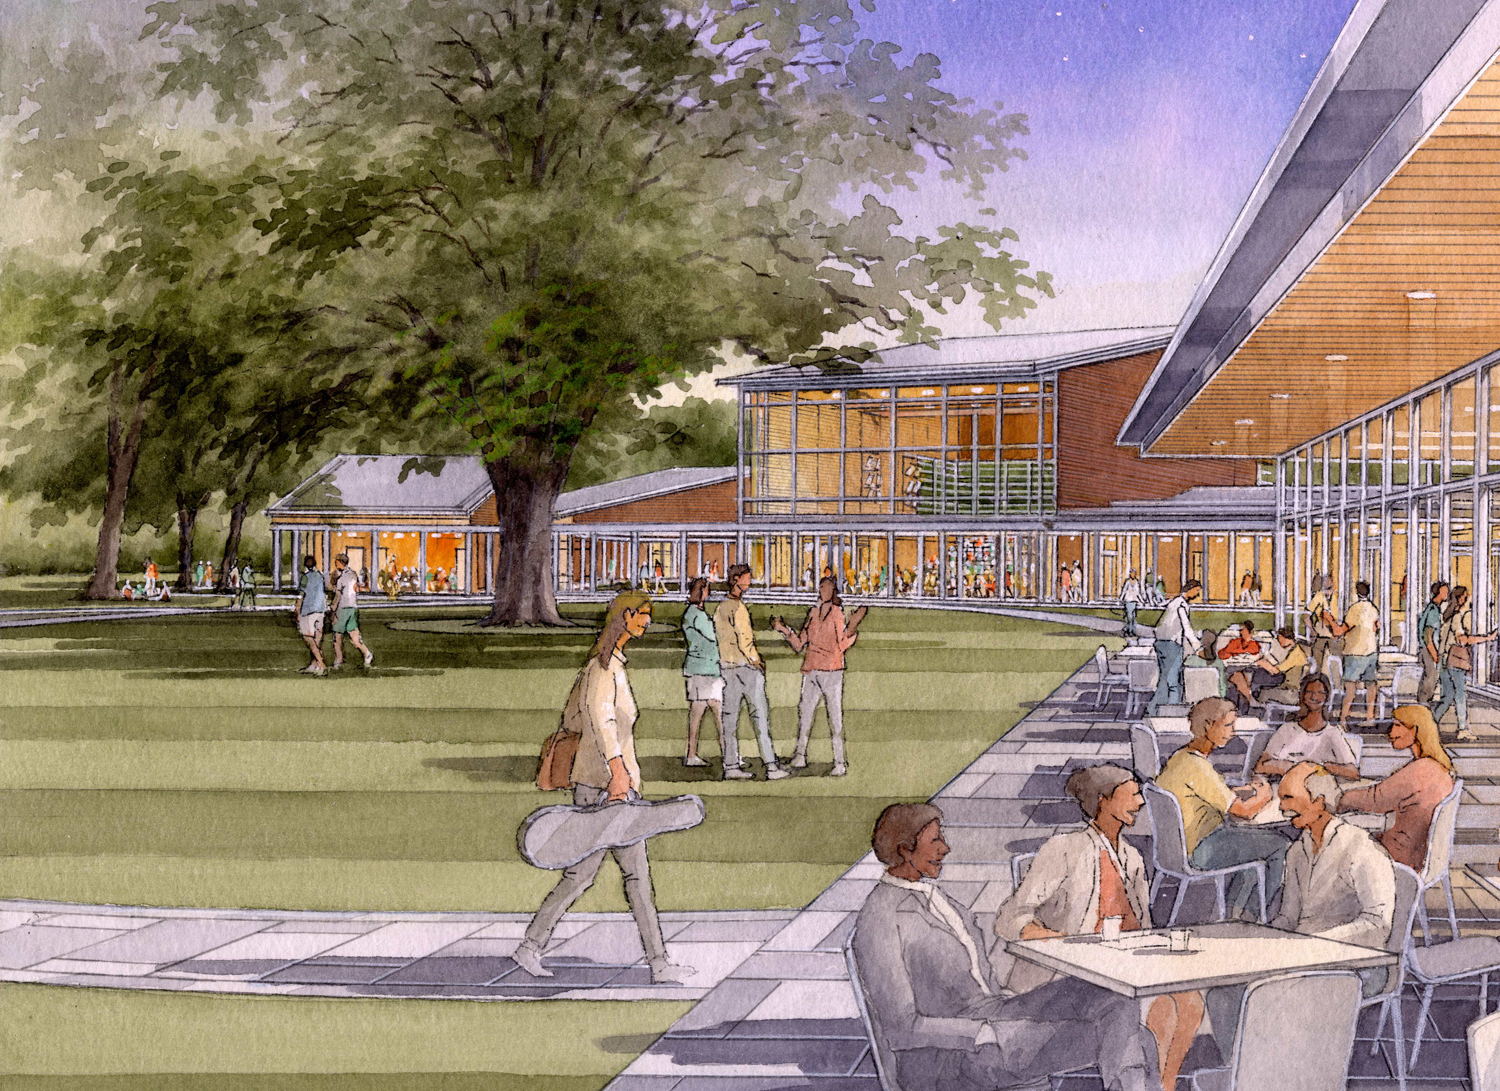 A rendering of what the new Tanglewood pavilions would look like. (Courtesy Boston Symphony Orchestra)